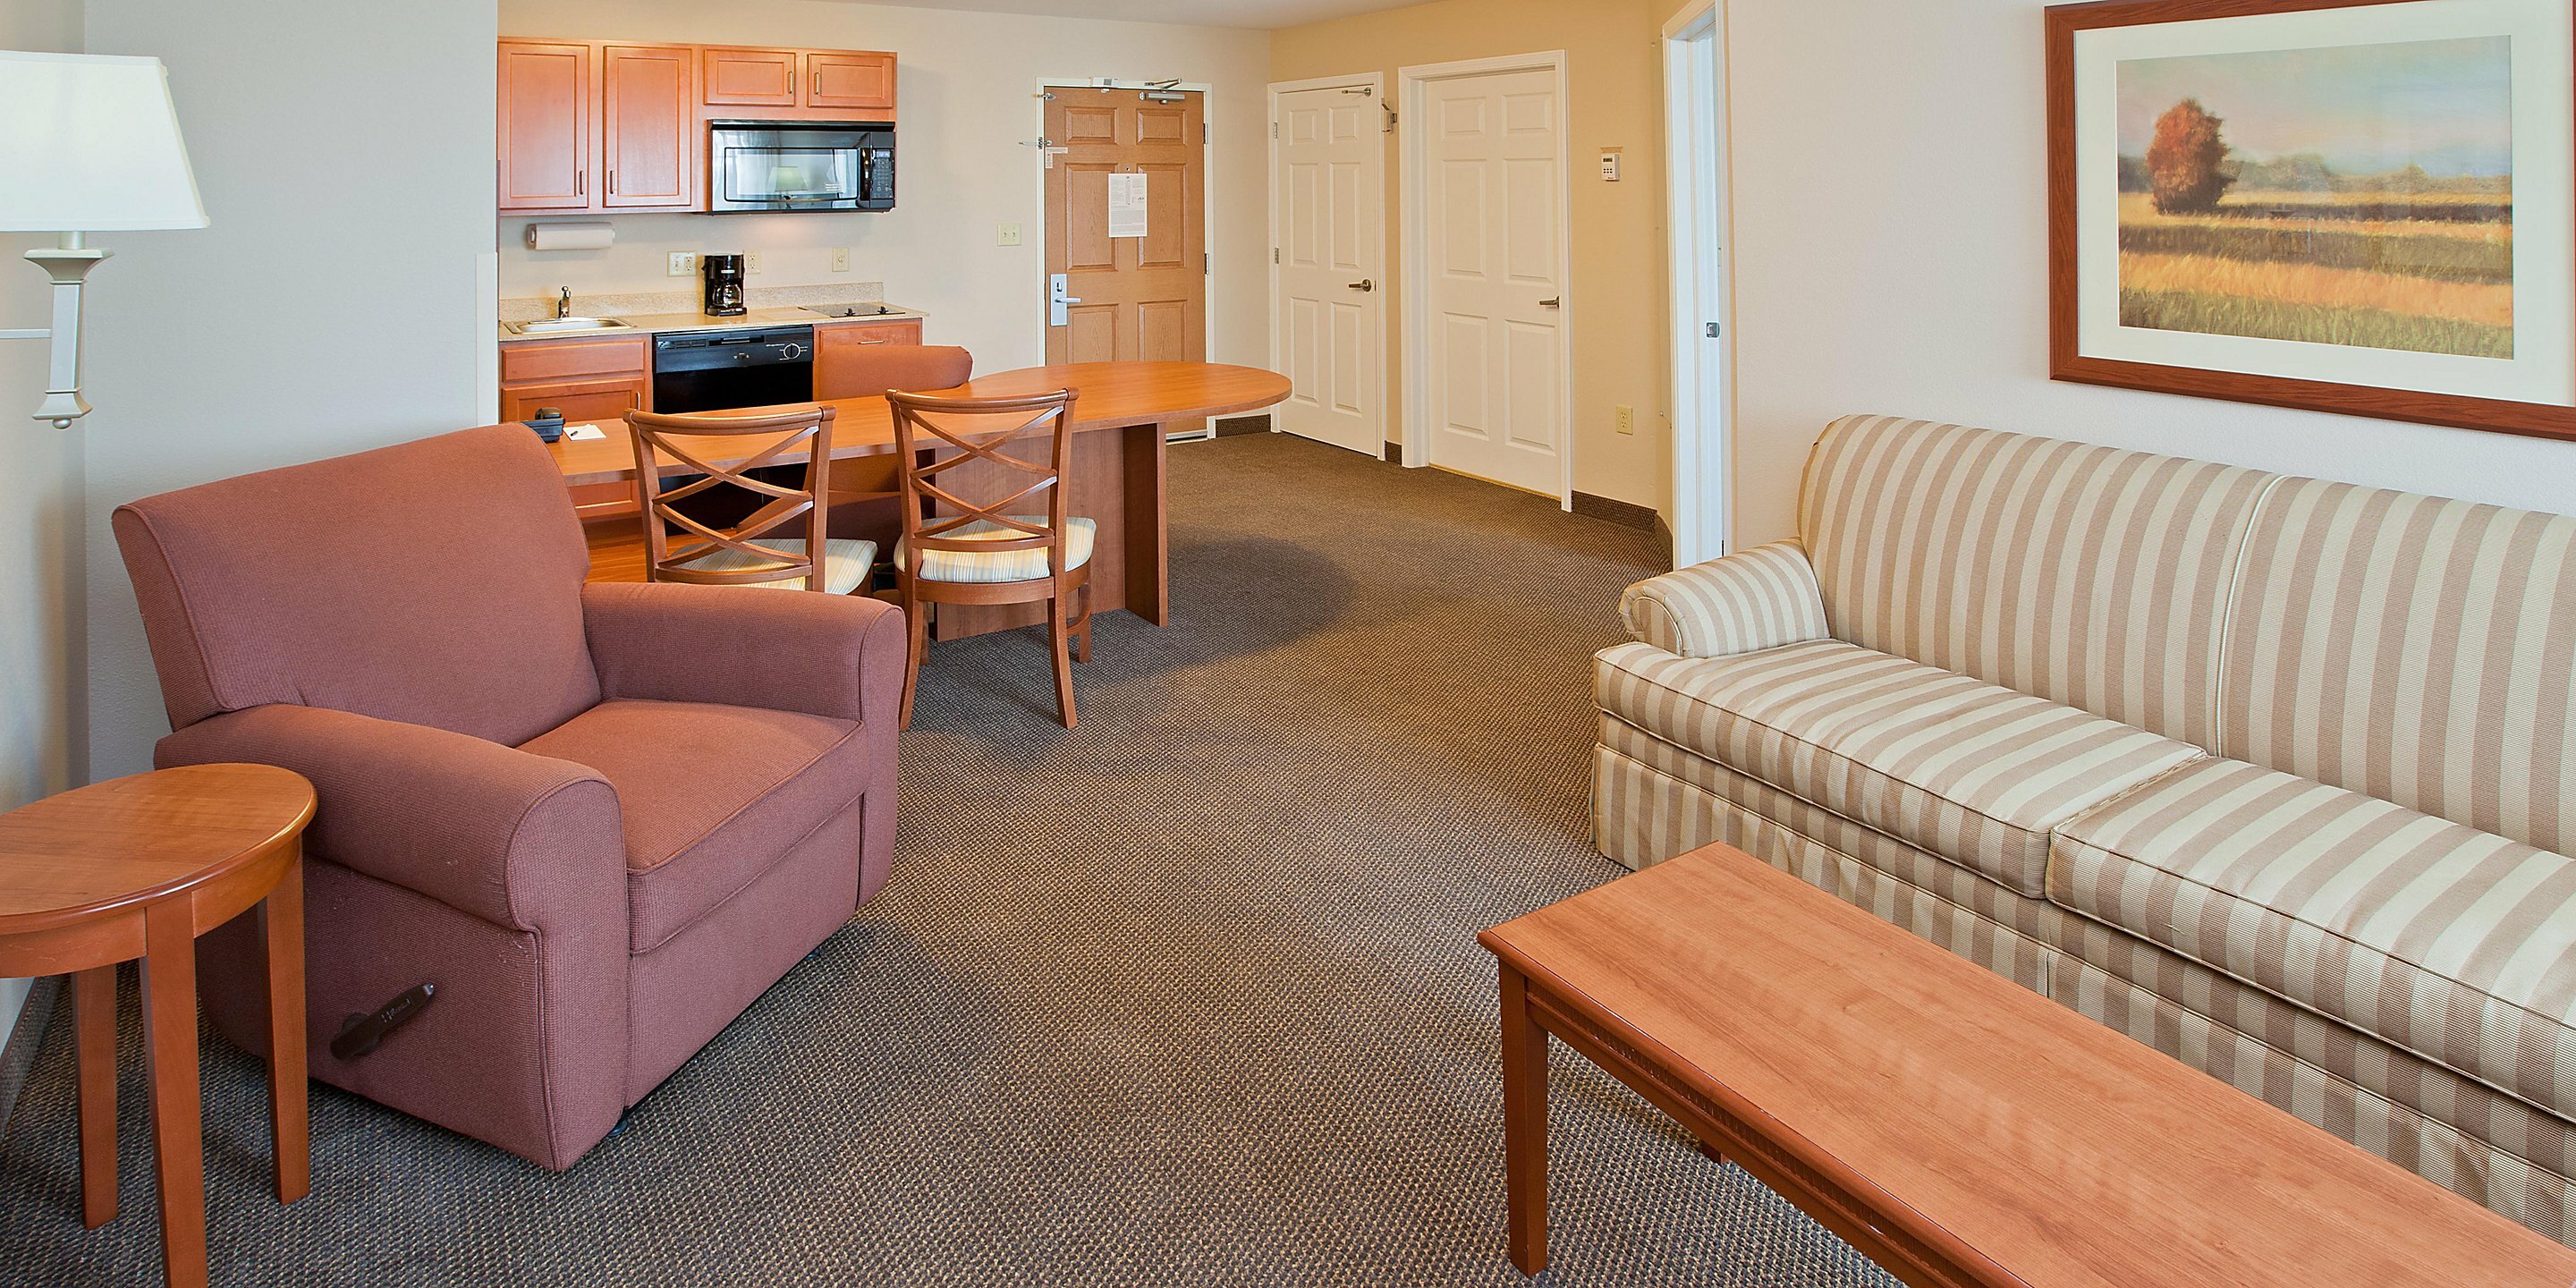 Photo of Candlewood Suites Louisville North, Clarksville, IN